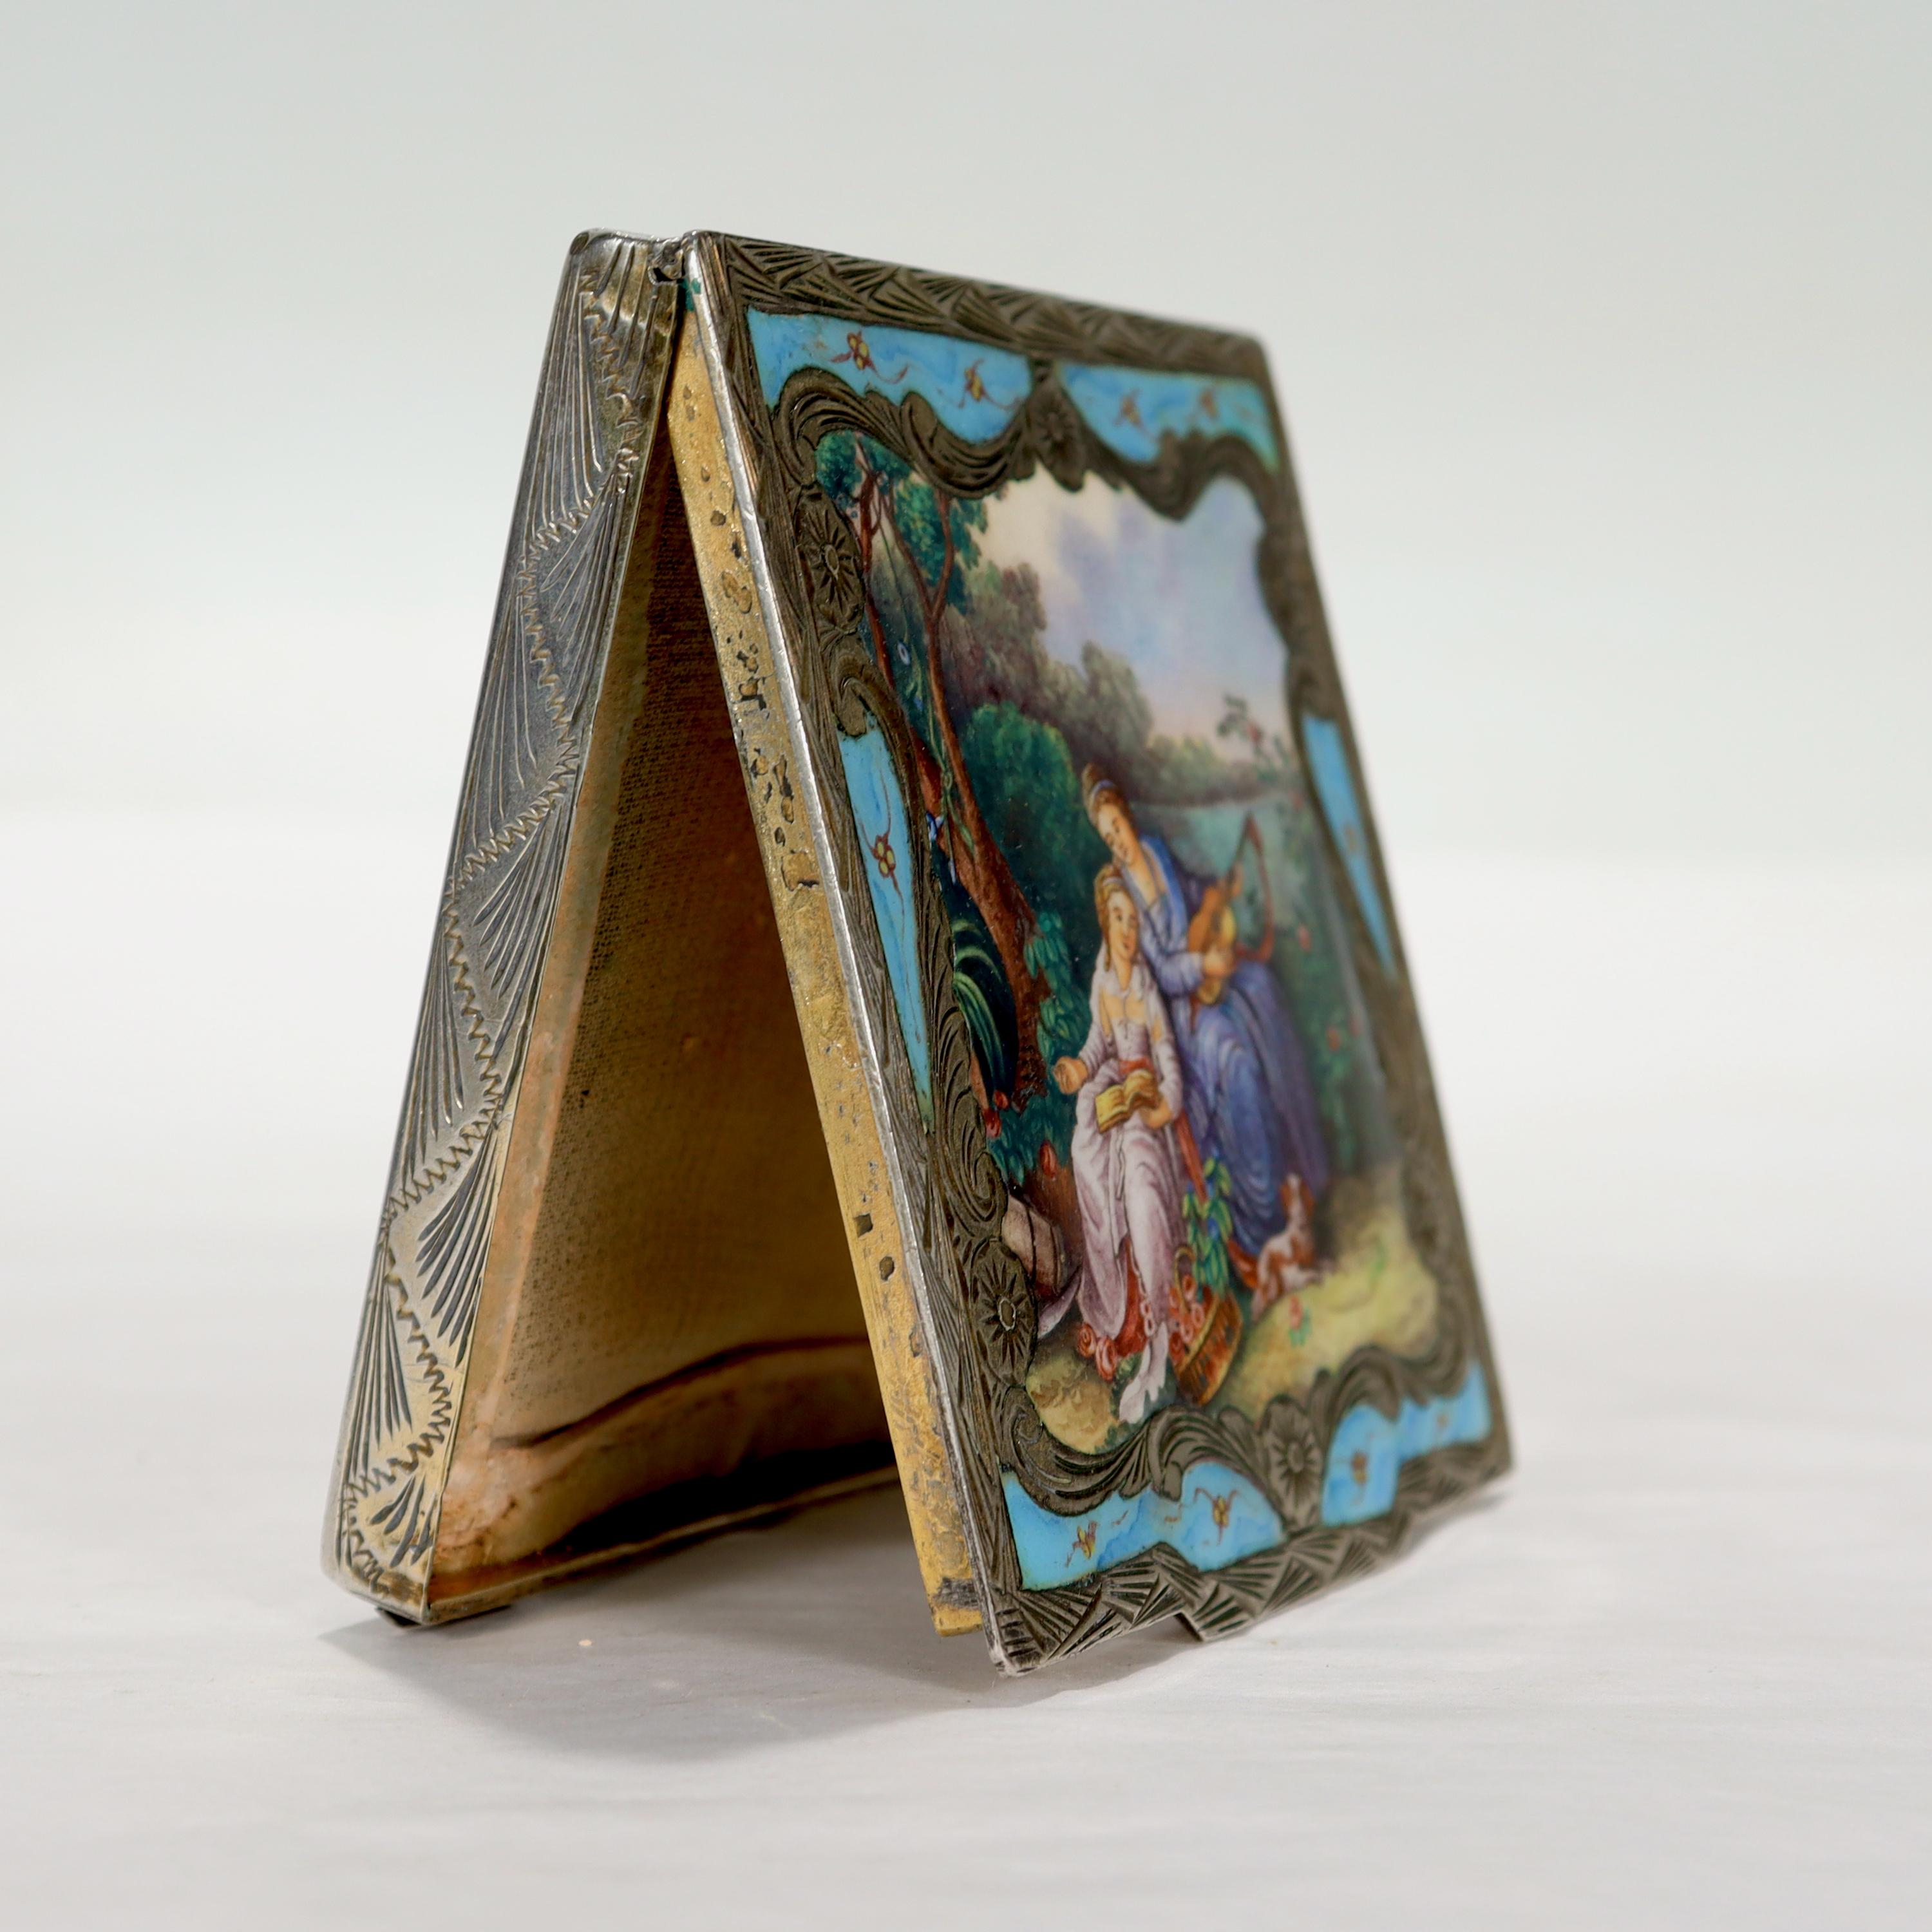 Old or Antique Italian Silver & Enamel Compact with its Original Box For Sale 4